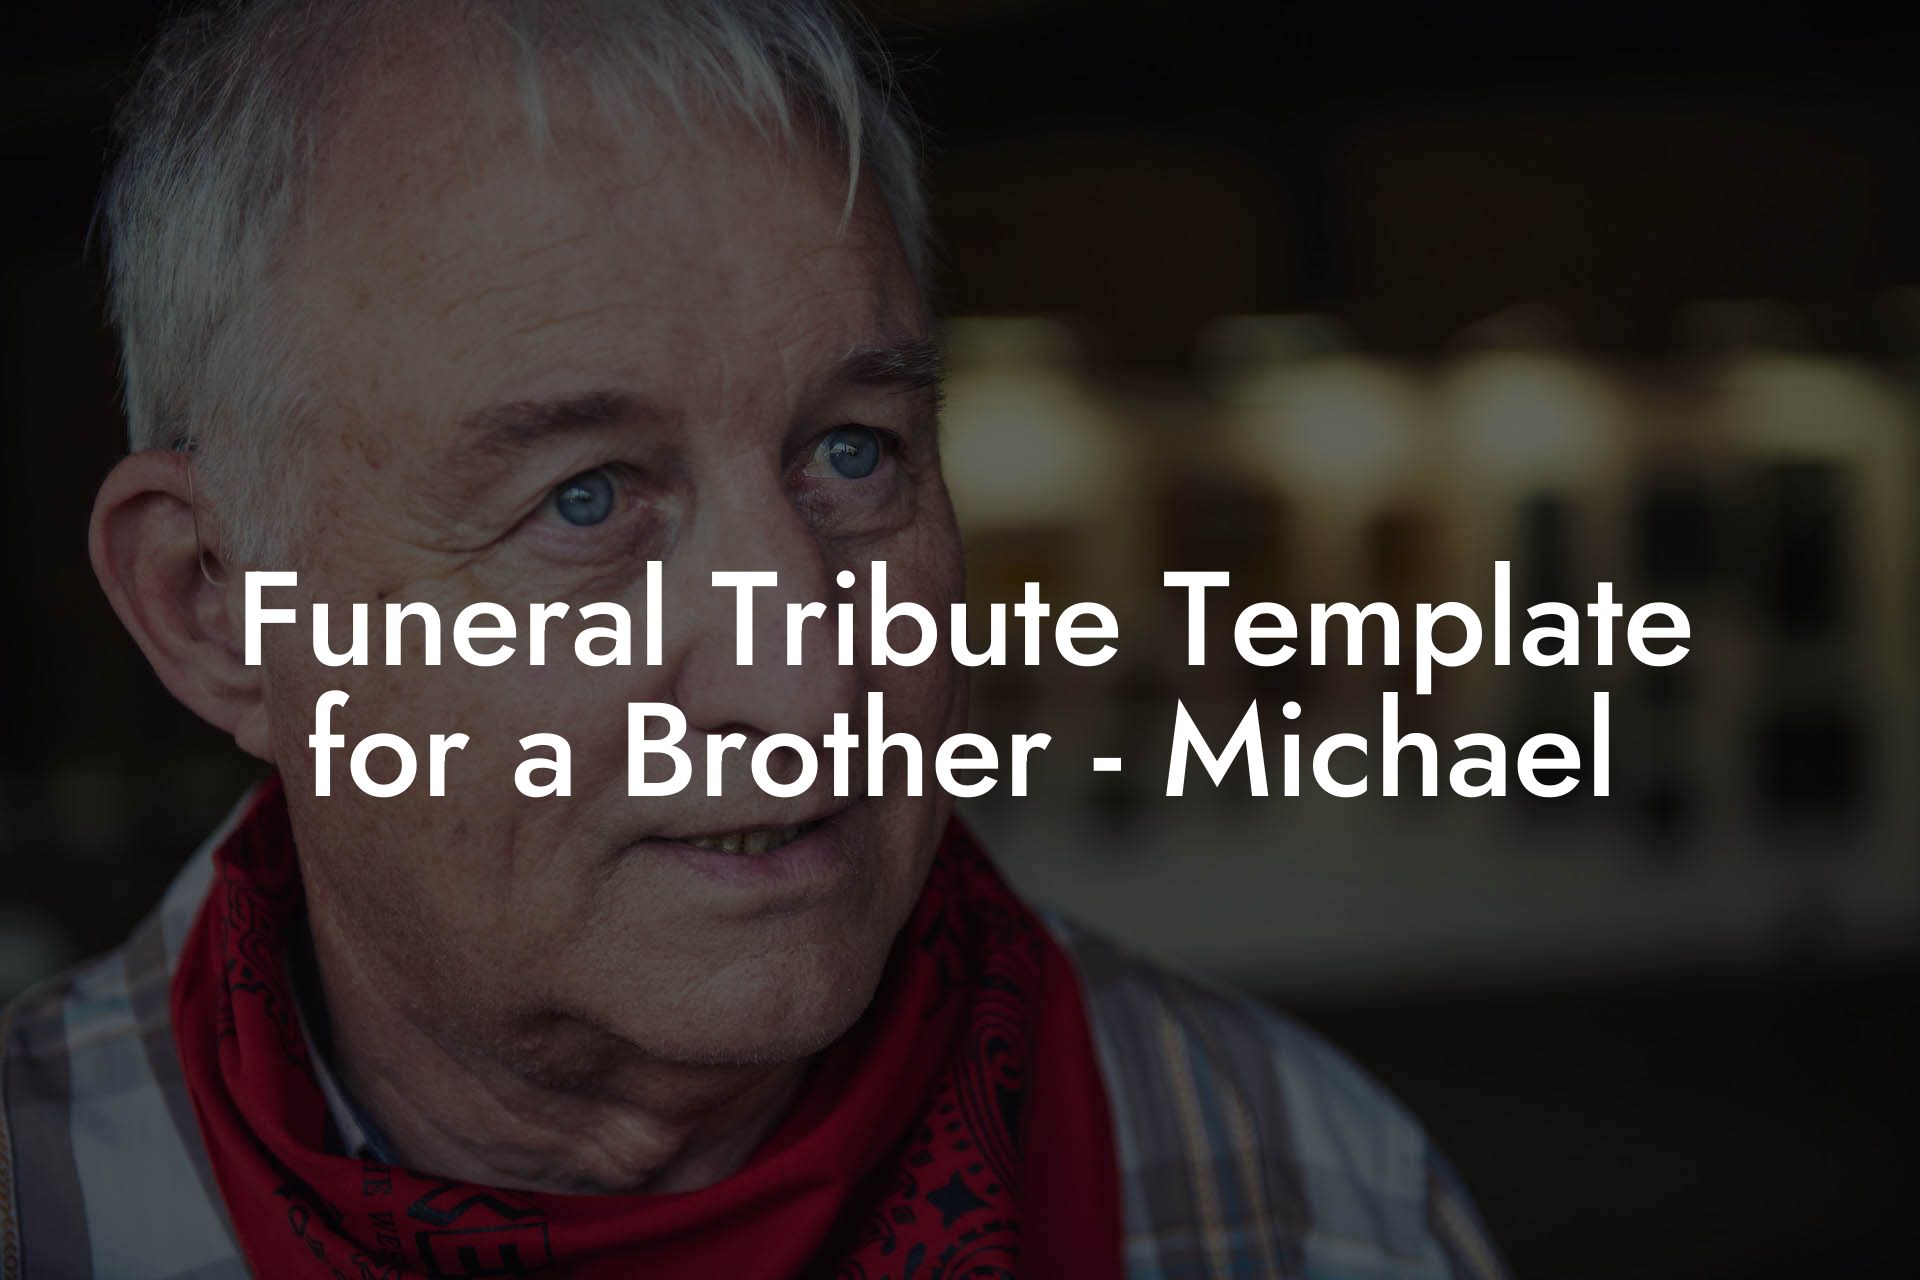 Funeral Tribute Template for a Brother - Michael